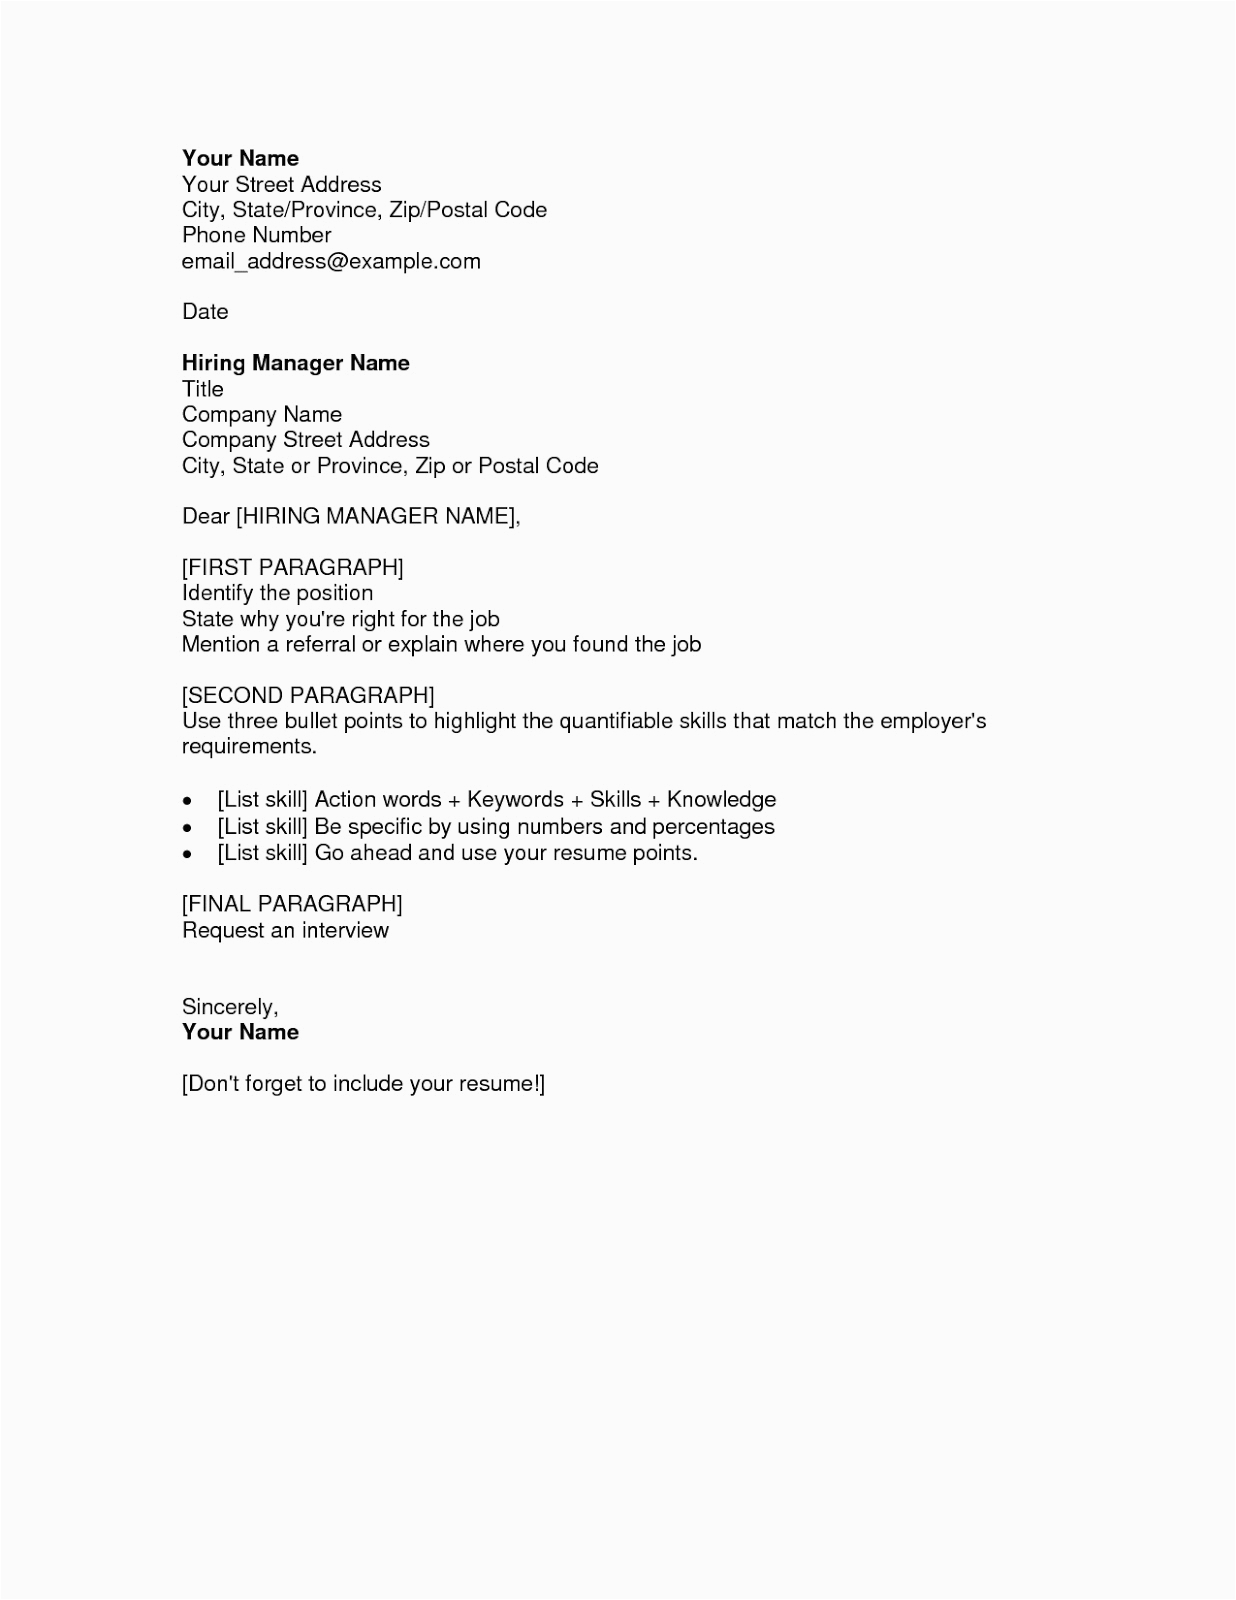 Free Sample Resume Cover Letter Template Free Cover Letter Samples for Resumes